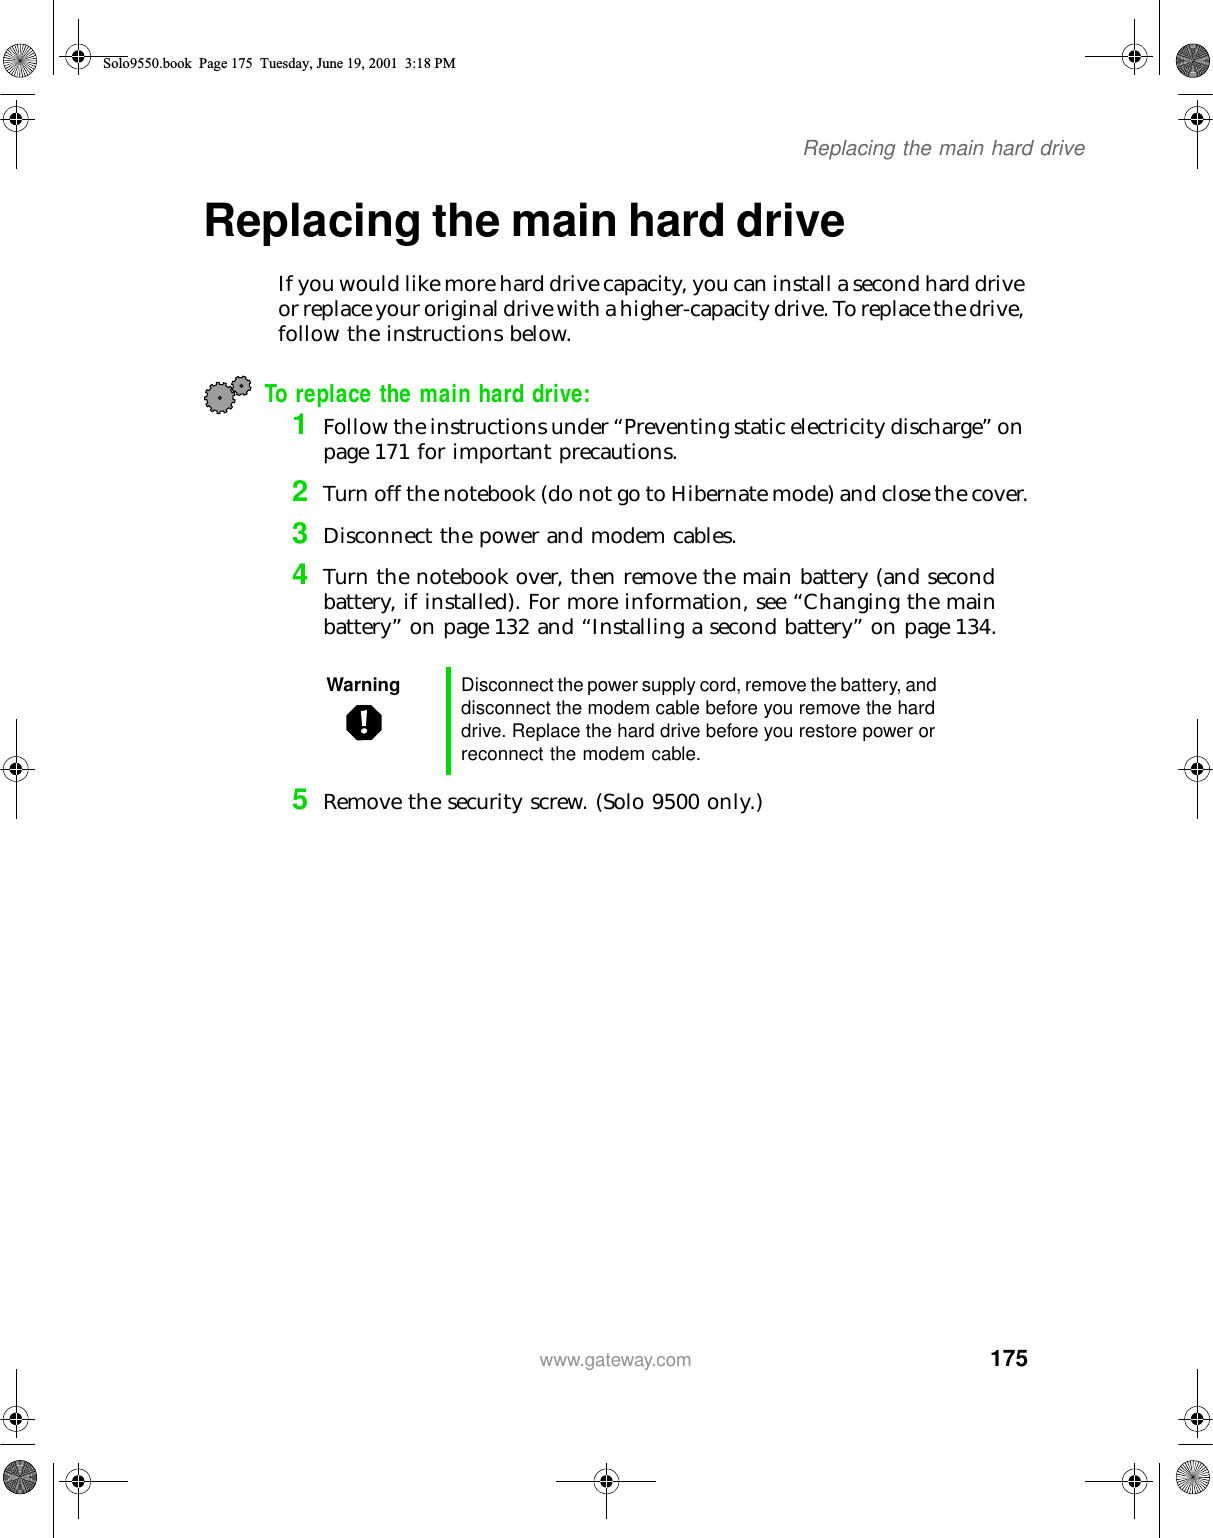 175Replacing the main hard drivewww.gateway.comReplacing the main hard driveIf you would like more hard drive capacity, you can install a second hard drive or replace your original drive with a higher-capacity drive. To replace the drive, follow the instructions below.To replace the main hard drive:1Follow the instructions under “Preventing static electricity discharge” on page 171 for important precautions.2Turn off the notebook (do not go to Hibernate mode) and close the cover.3Disconnect the power and modem cables.4Turn the notebook over, then remove the main battery (and second battery, if installed). For more information, see “Changing the main battery” on page 132 and “Installing a second battery” on page 134.5Remove the security screw. (Solo 9500 only.)Warning Disconnect the power supply cord, remove the battery, and disconnect the modem cable before you remove the hard drive. Replace the hard drive before you restore power or reconnect the modem cable.Solo9550.book Page 175 Tuesday, June 19, 2001 3:18 PM